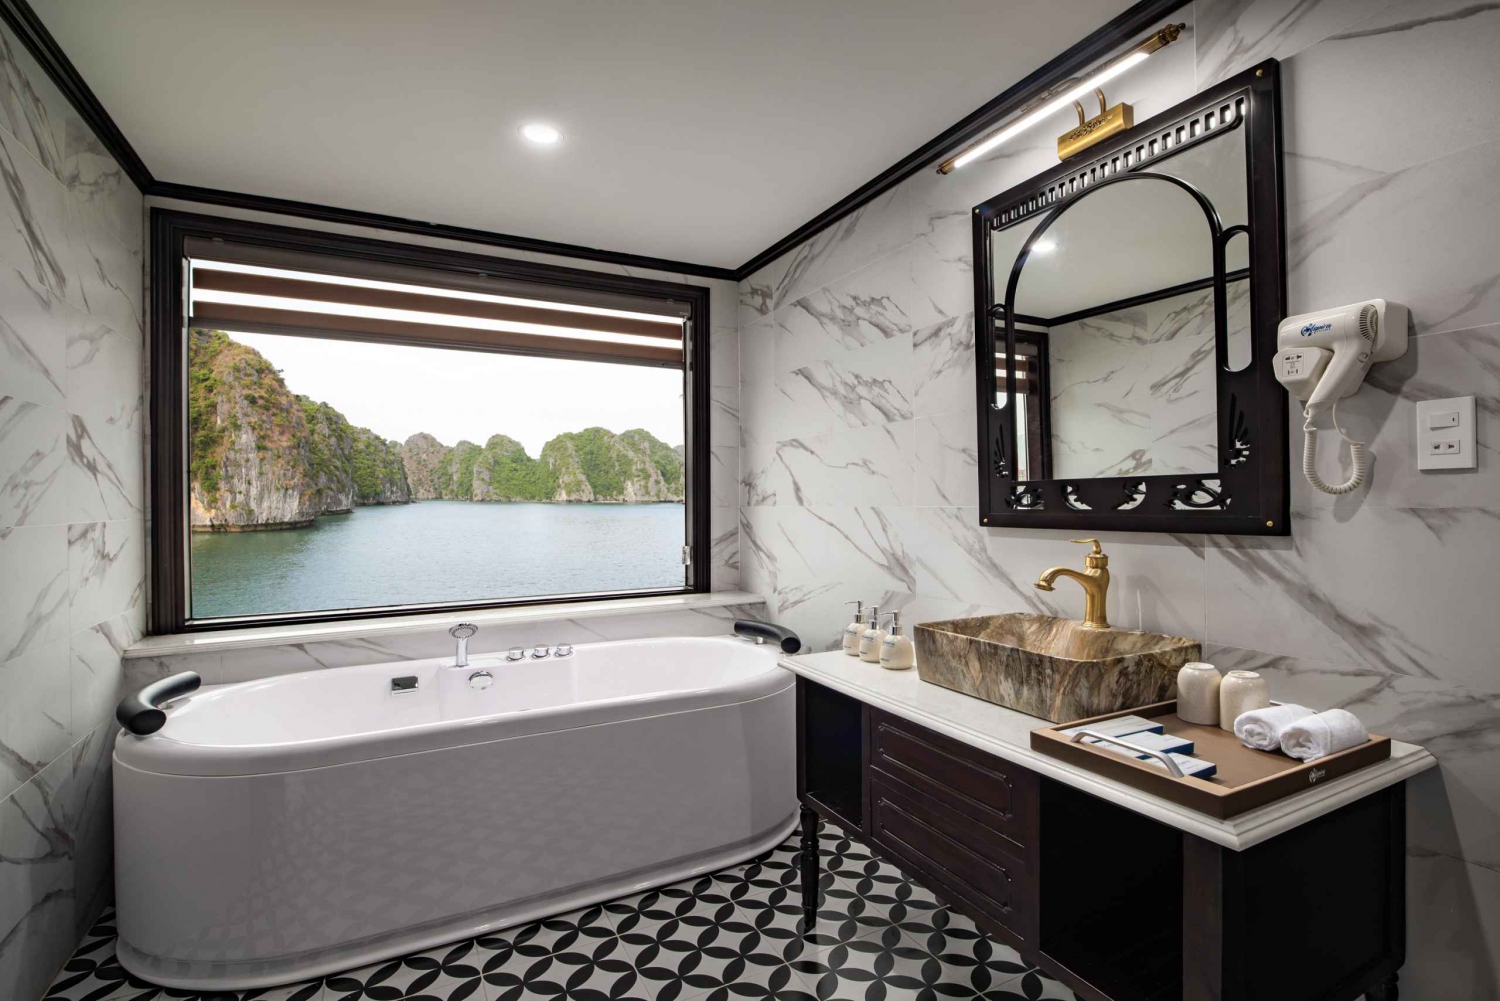 From Hanoi: 2-Day Cruise Trip with Private Balcony & Bathtub